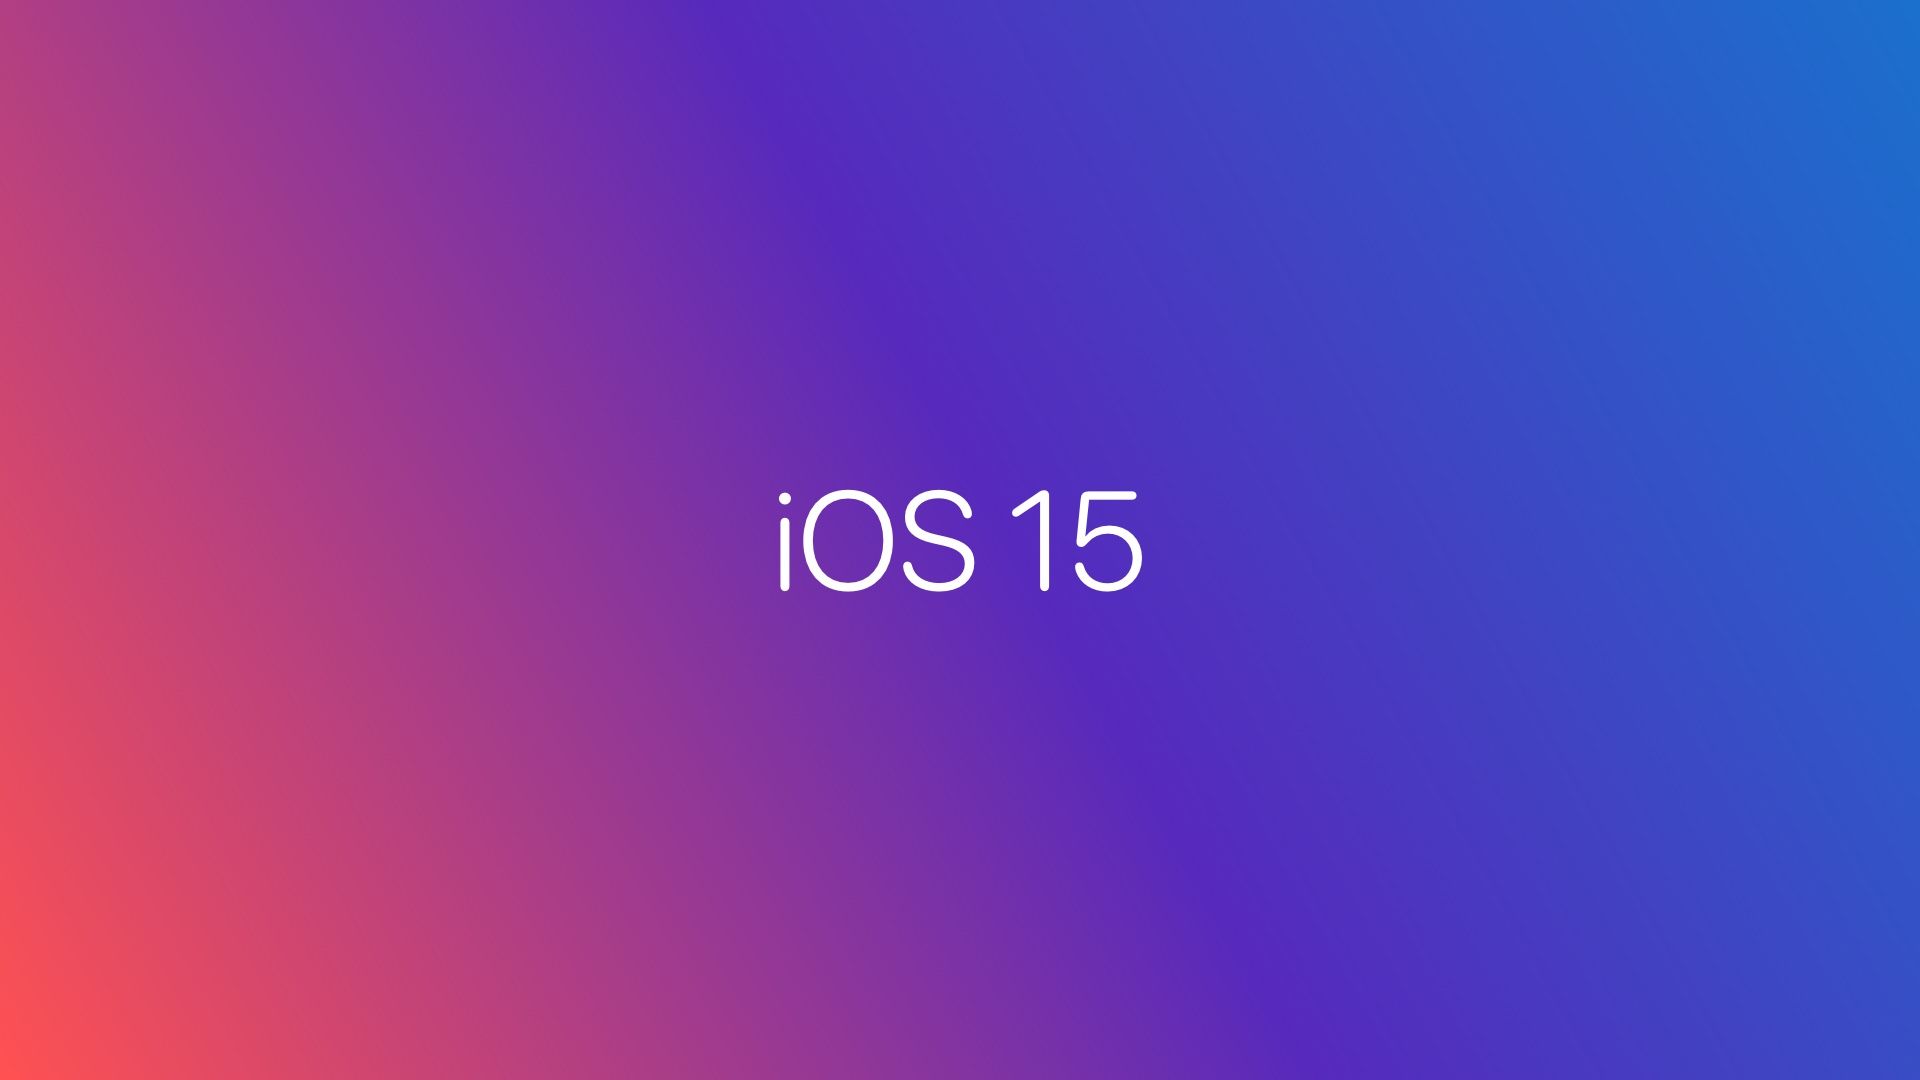 Download iOS 15 Wallpaper for iPhone